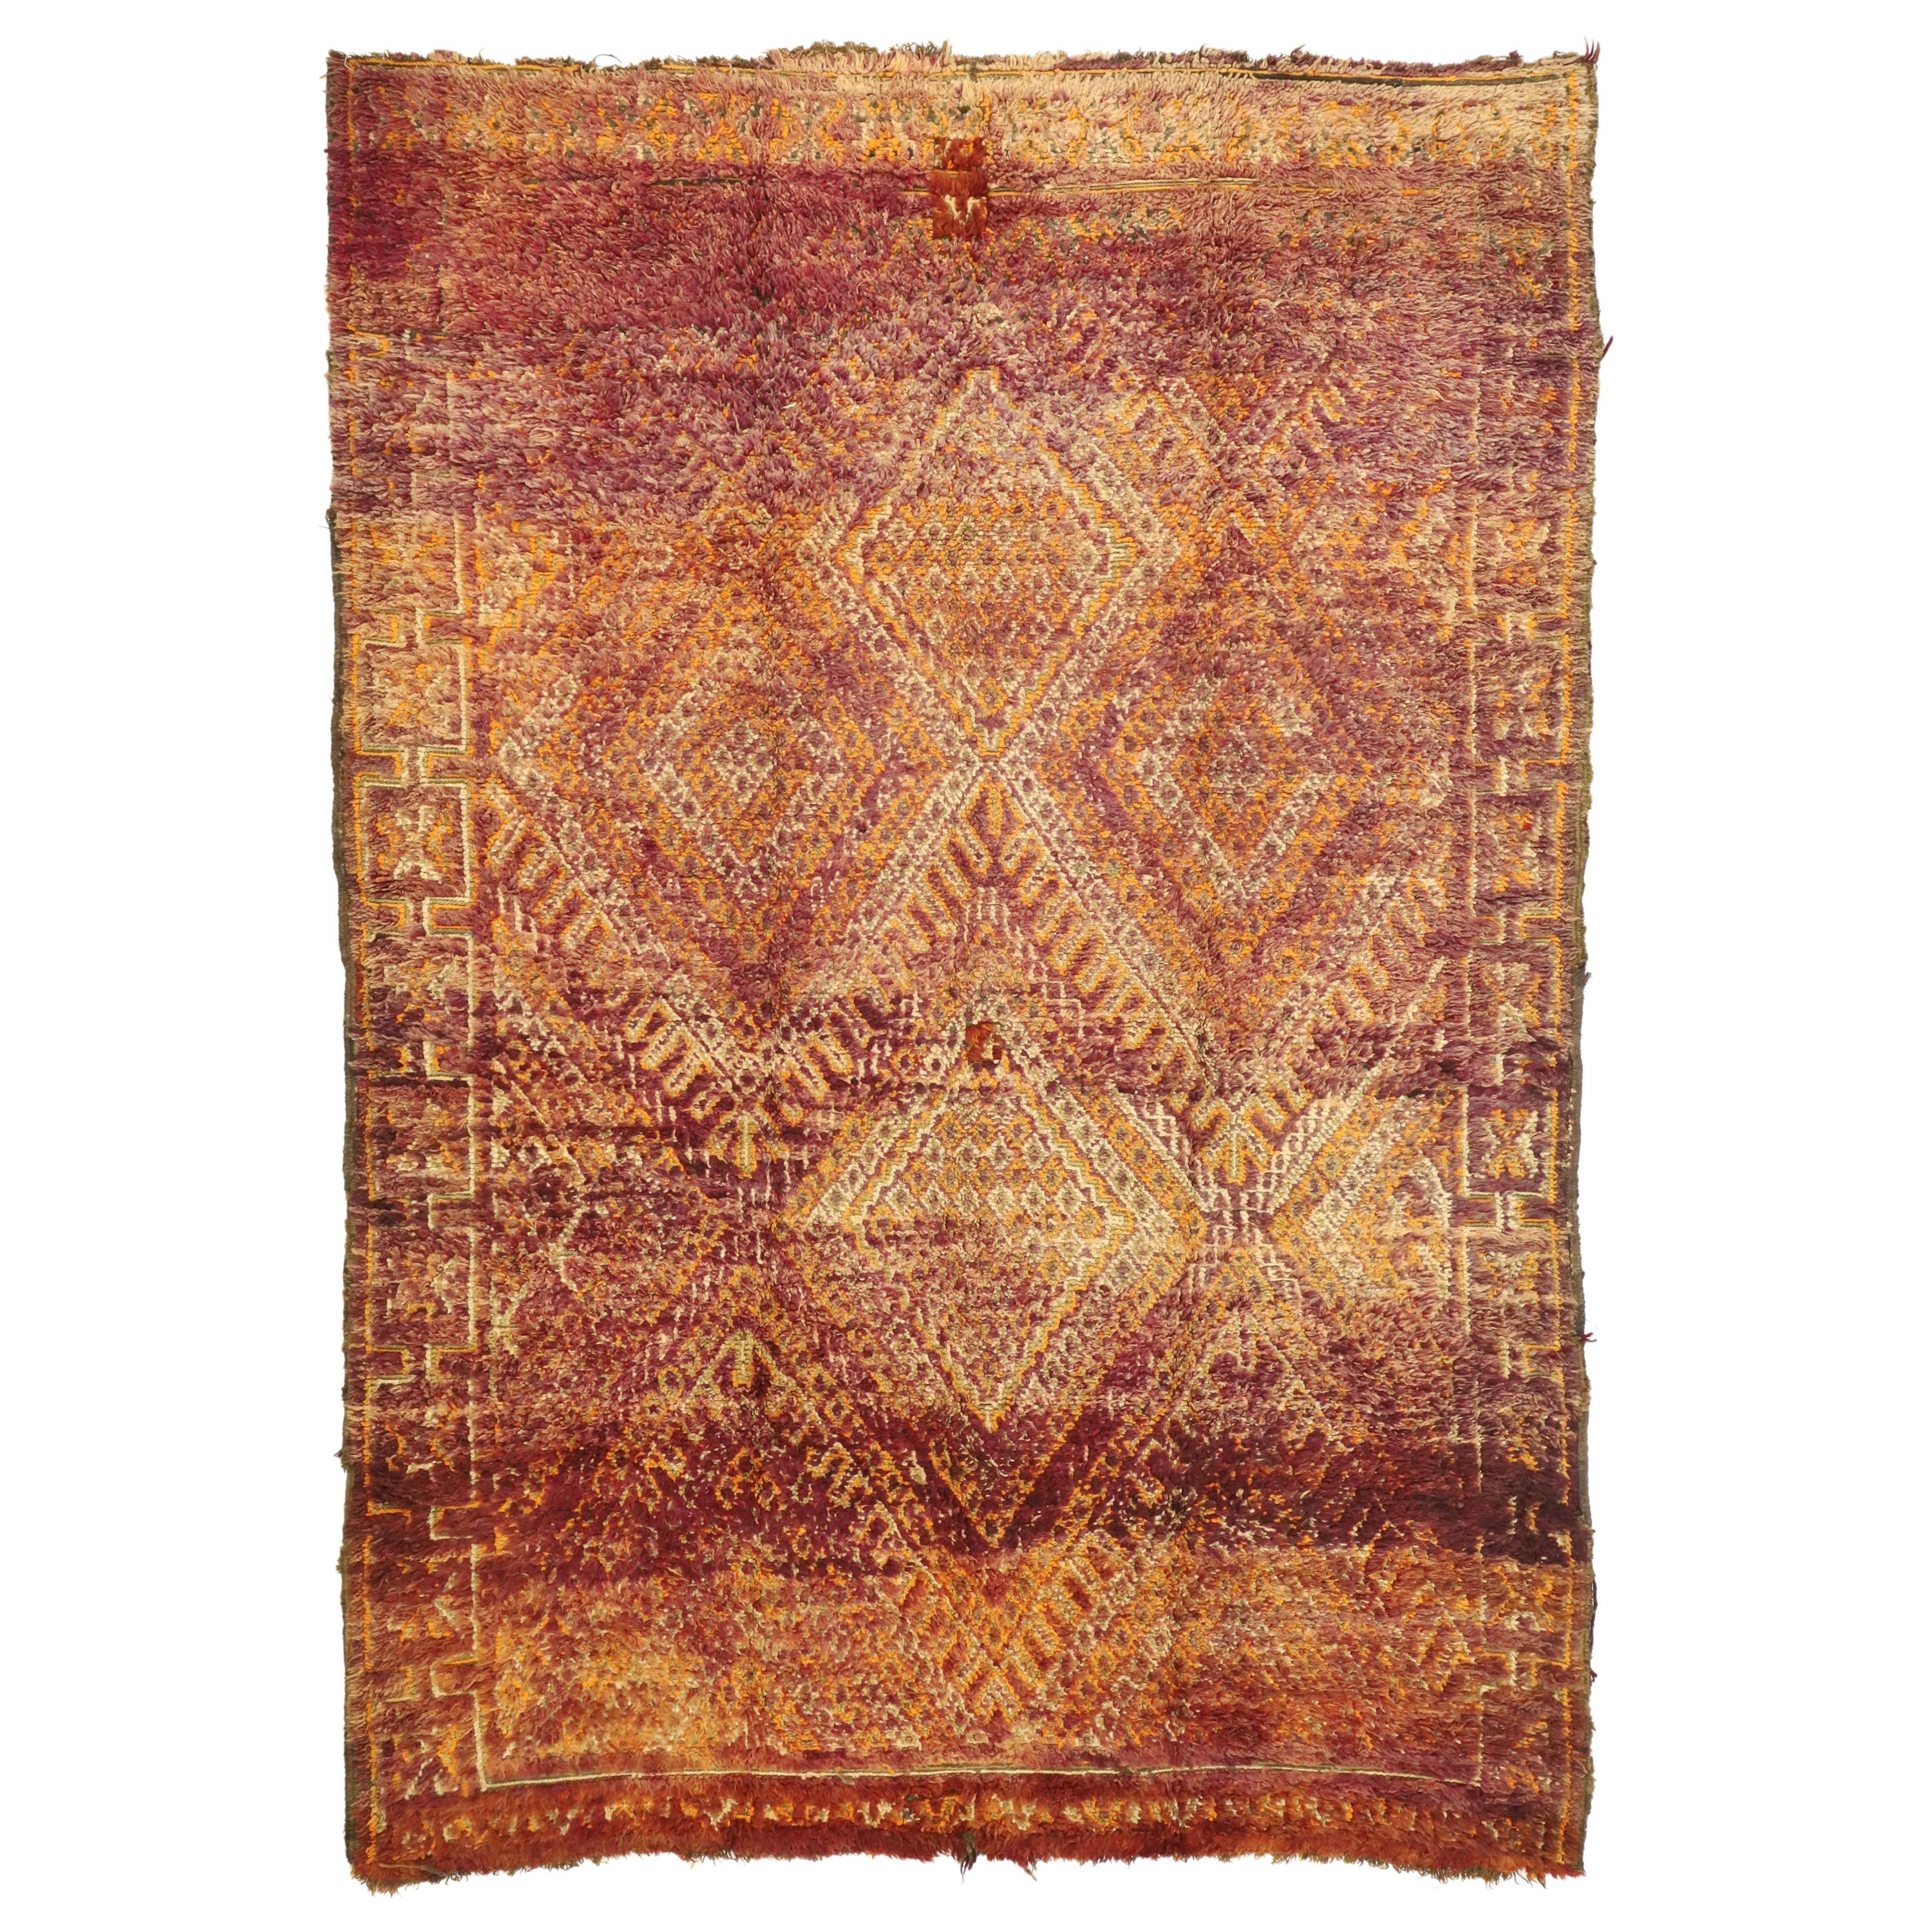 Vintage Beni M'Guild Moroccan Rug with a Diamond Pattern in Warm, Spicy Hues